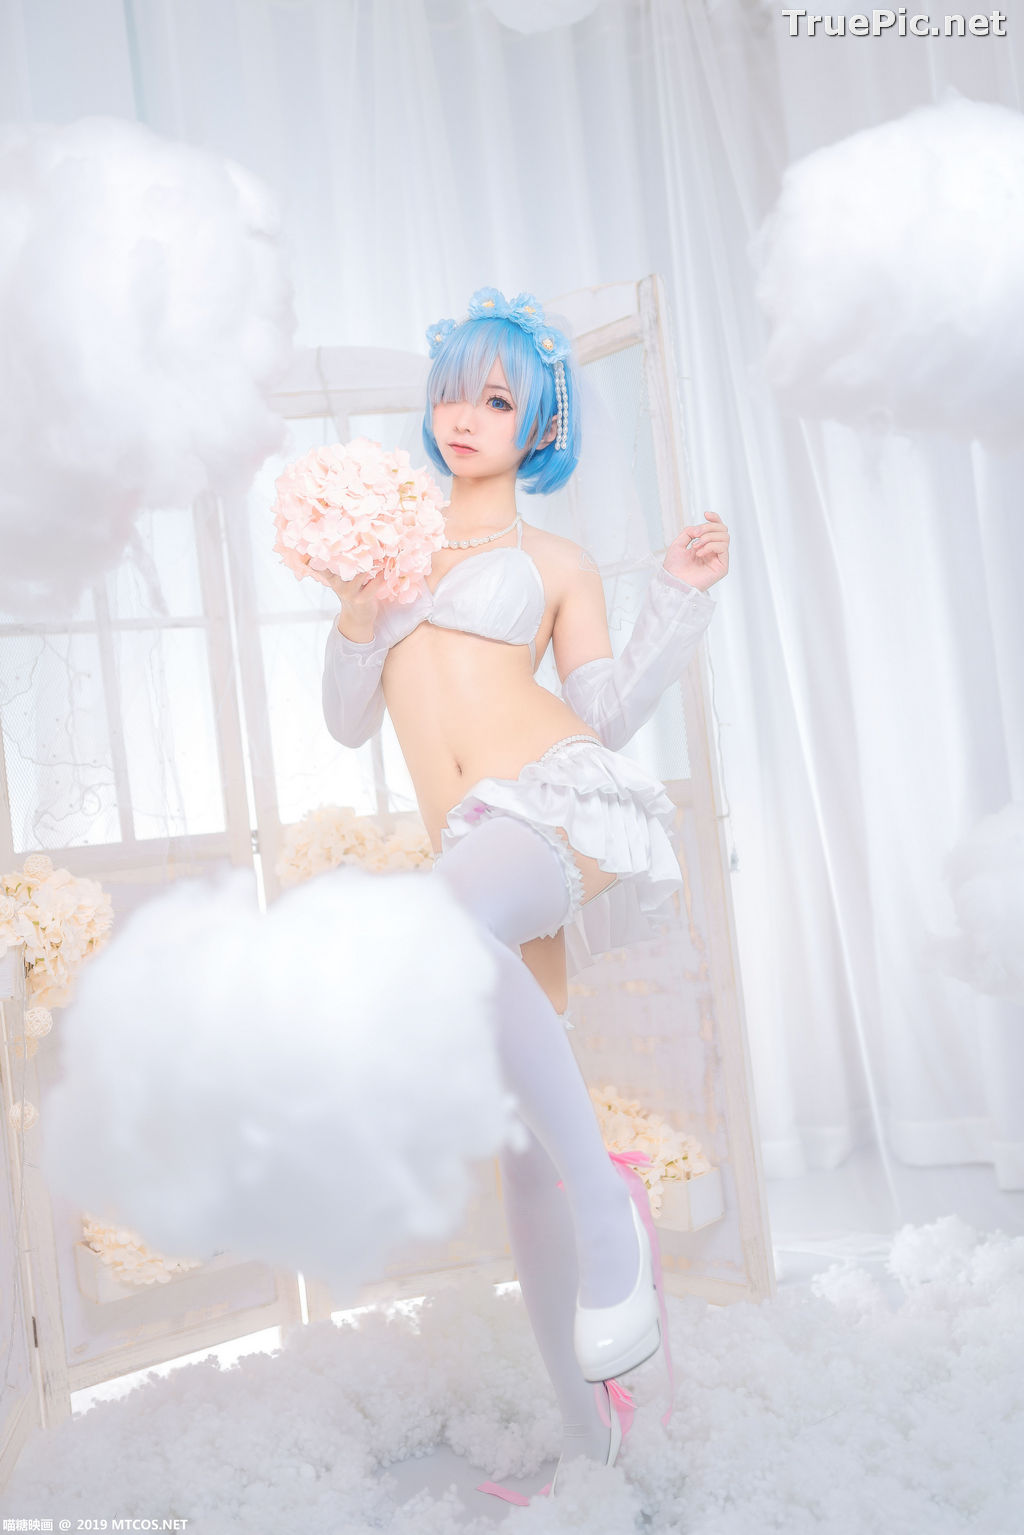 Image [MTCos] 喵糖映画 Vol.029 – Chinese Cute Model – Bride Rem Cosplay - TruePic.net - Picture-12